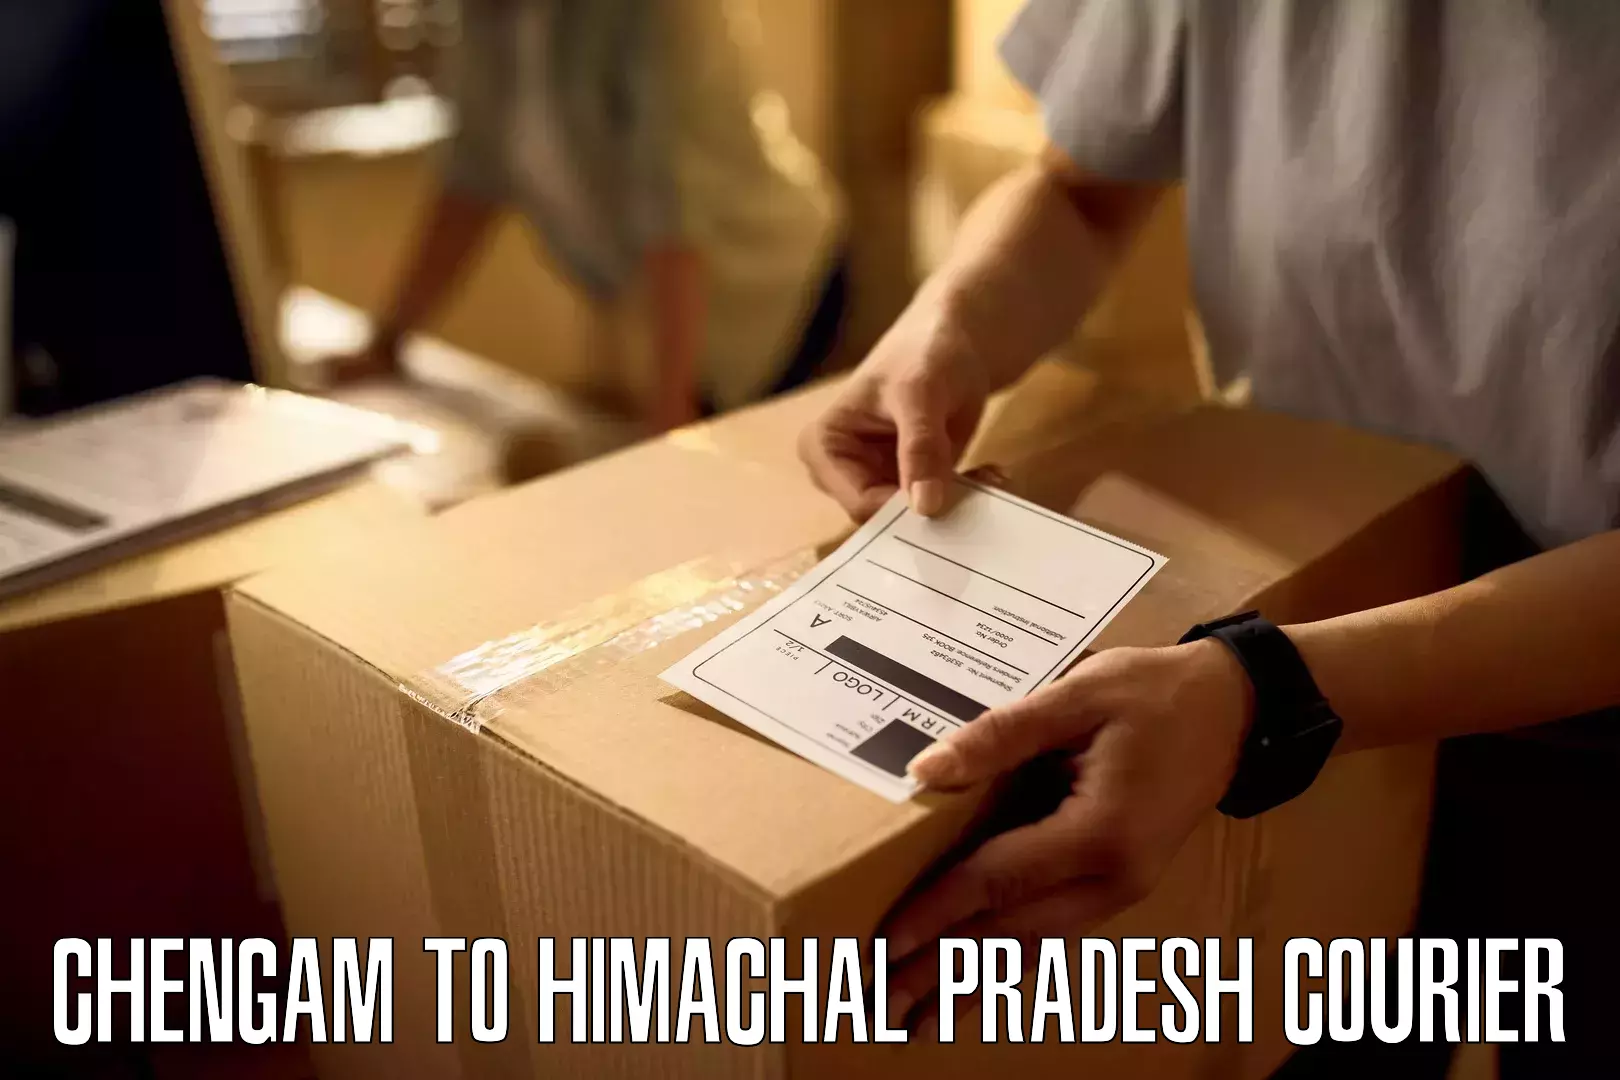 Advanced delivery network Chengam to Himachal Pradesh